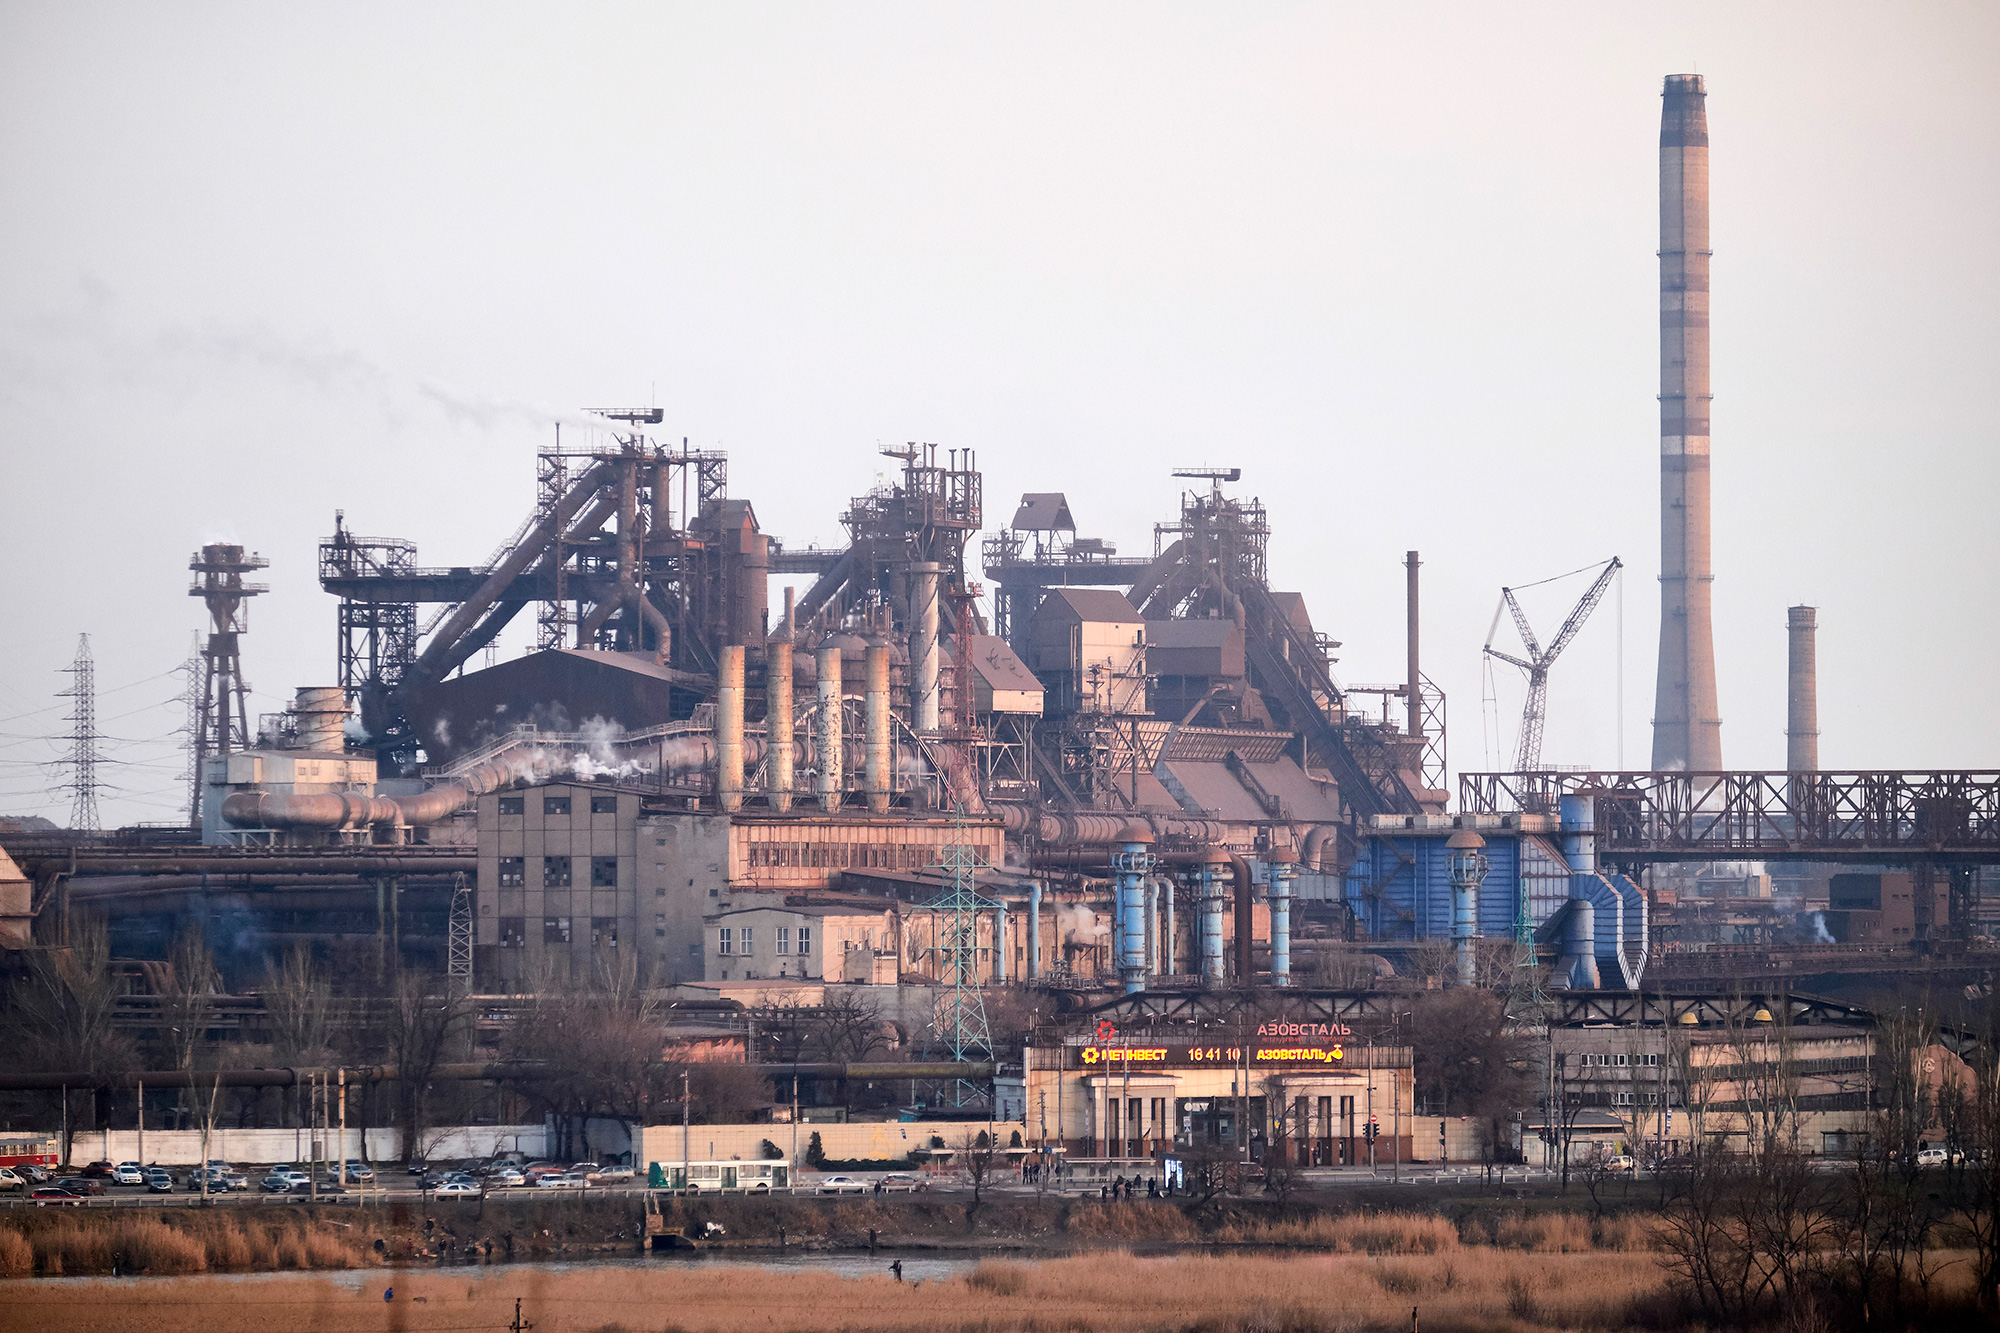 The Azov Steel plant in Mariupol, Ukraine on February 17, 2022. Due to conflicting reports from both sides, it is currently unclear whether Ukraine remains in control of the plant. 